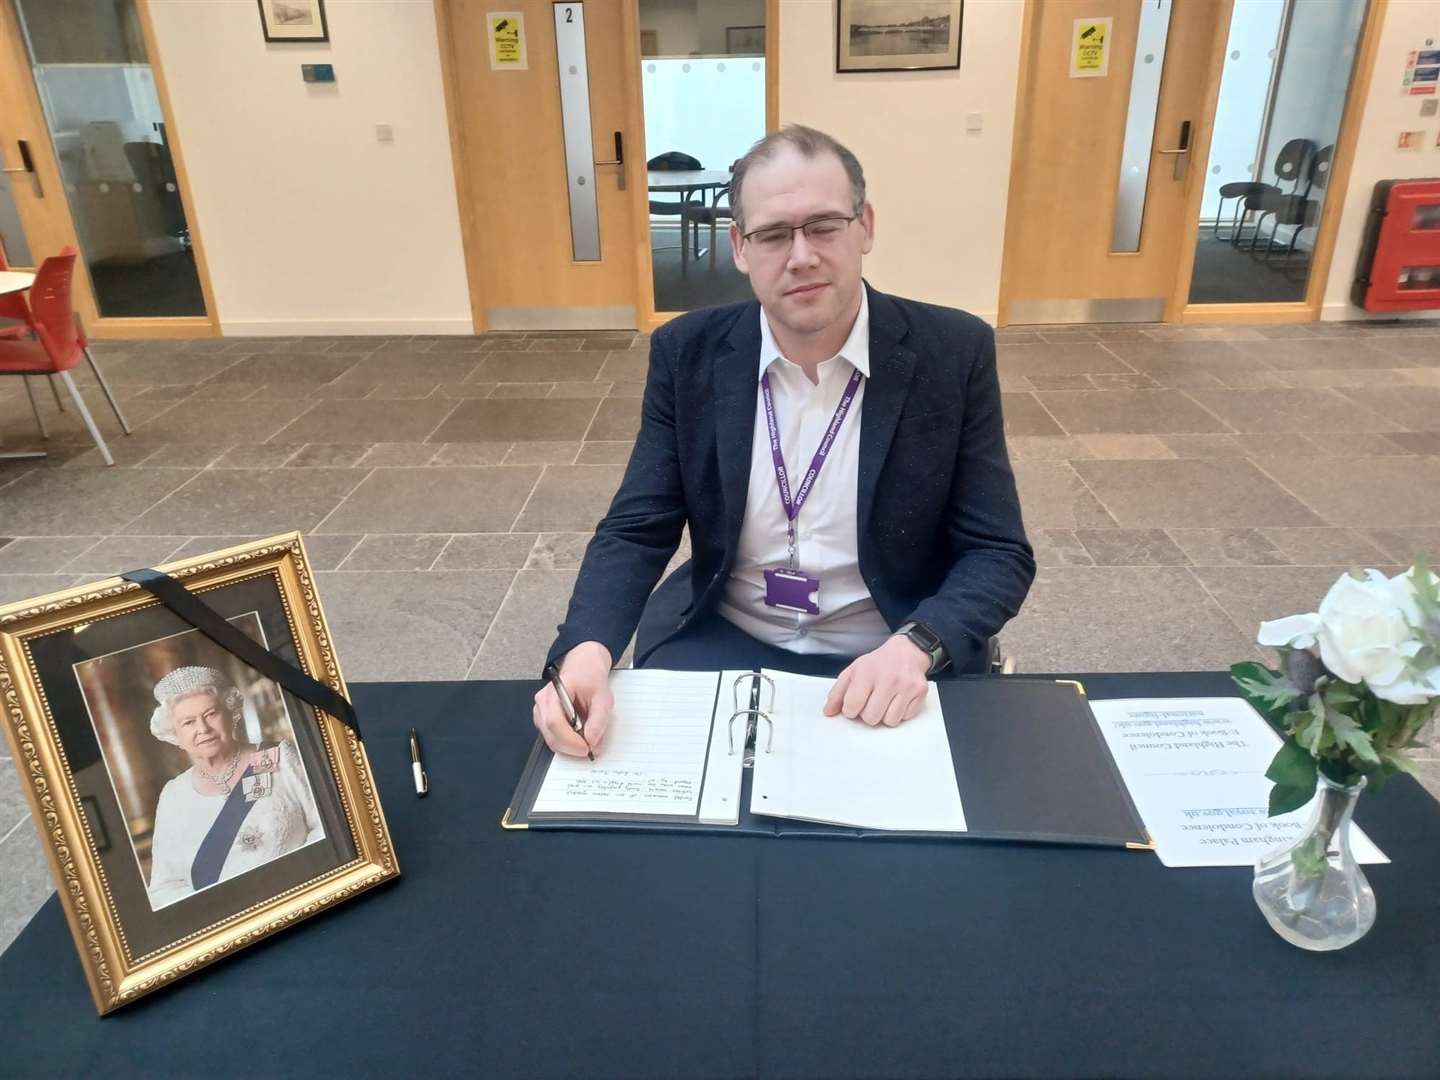 Councillor Andrew Jarvie signing the book of condolence in Caithness House.